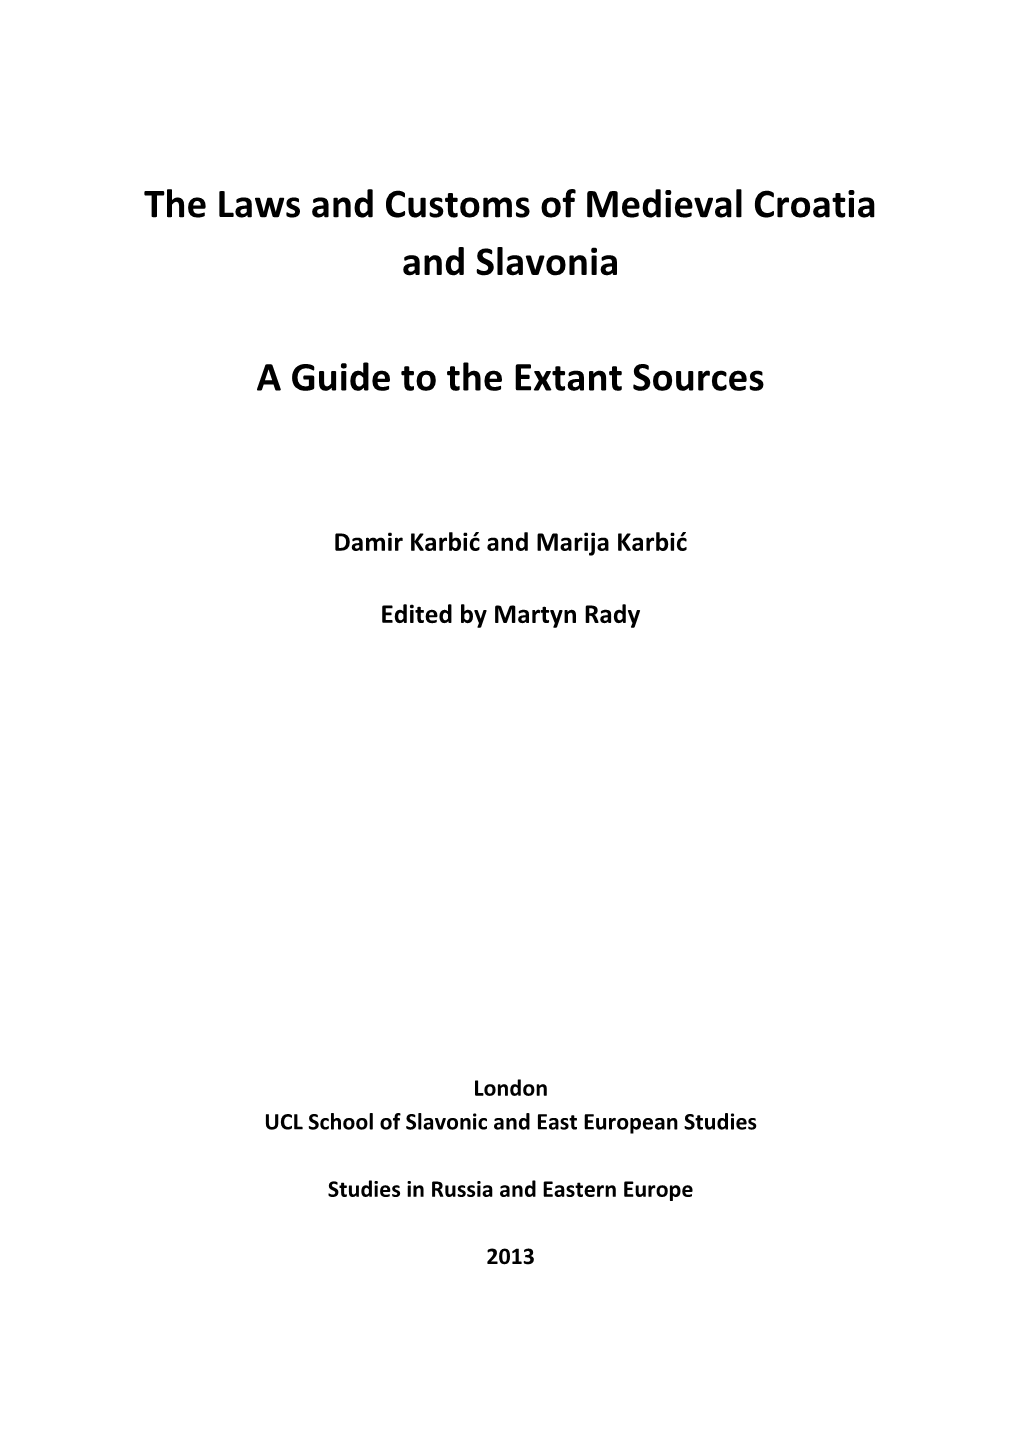 The Laws and Customs of Medieval Croatia and Slavonia a Guide to the Extant Sources